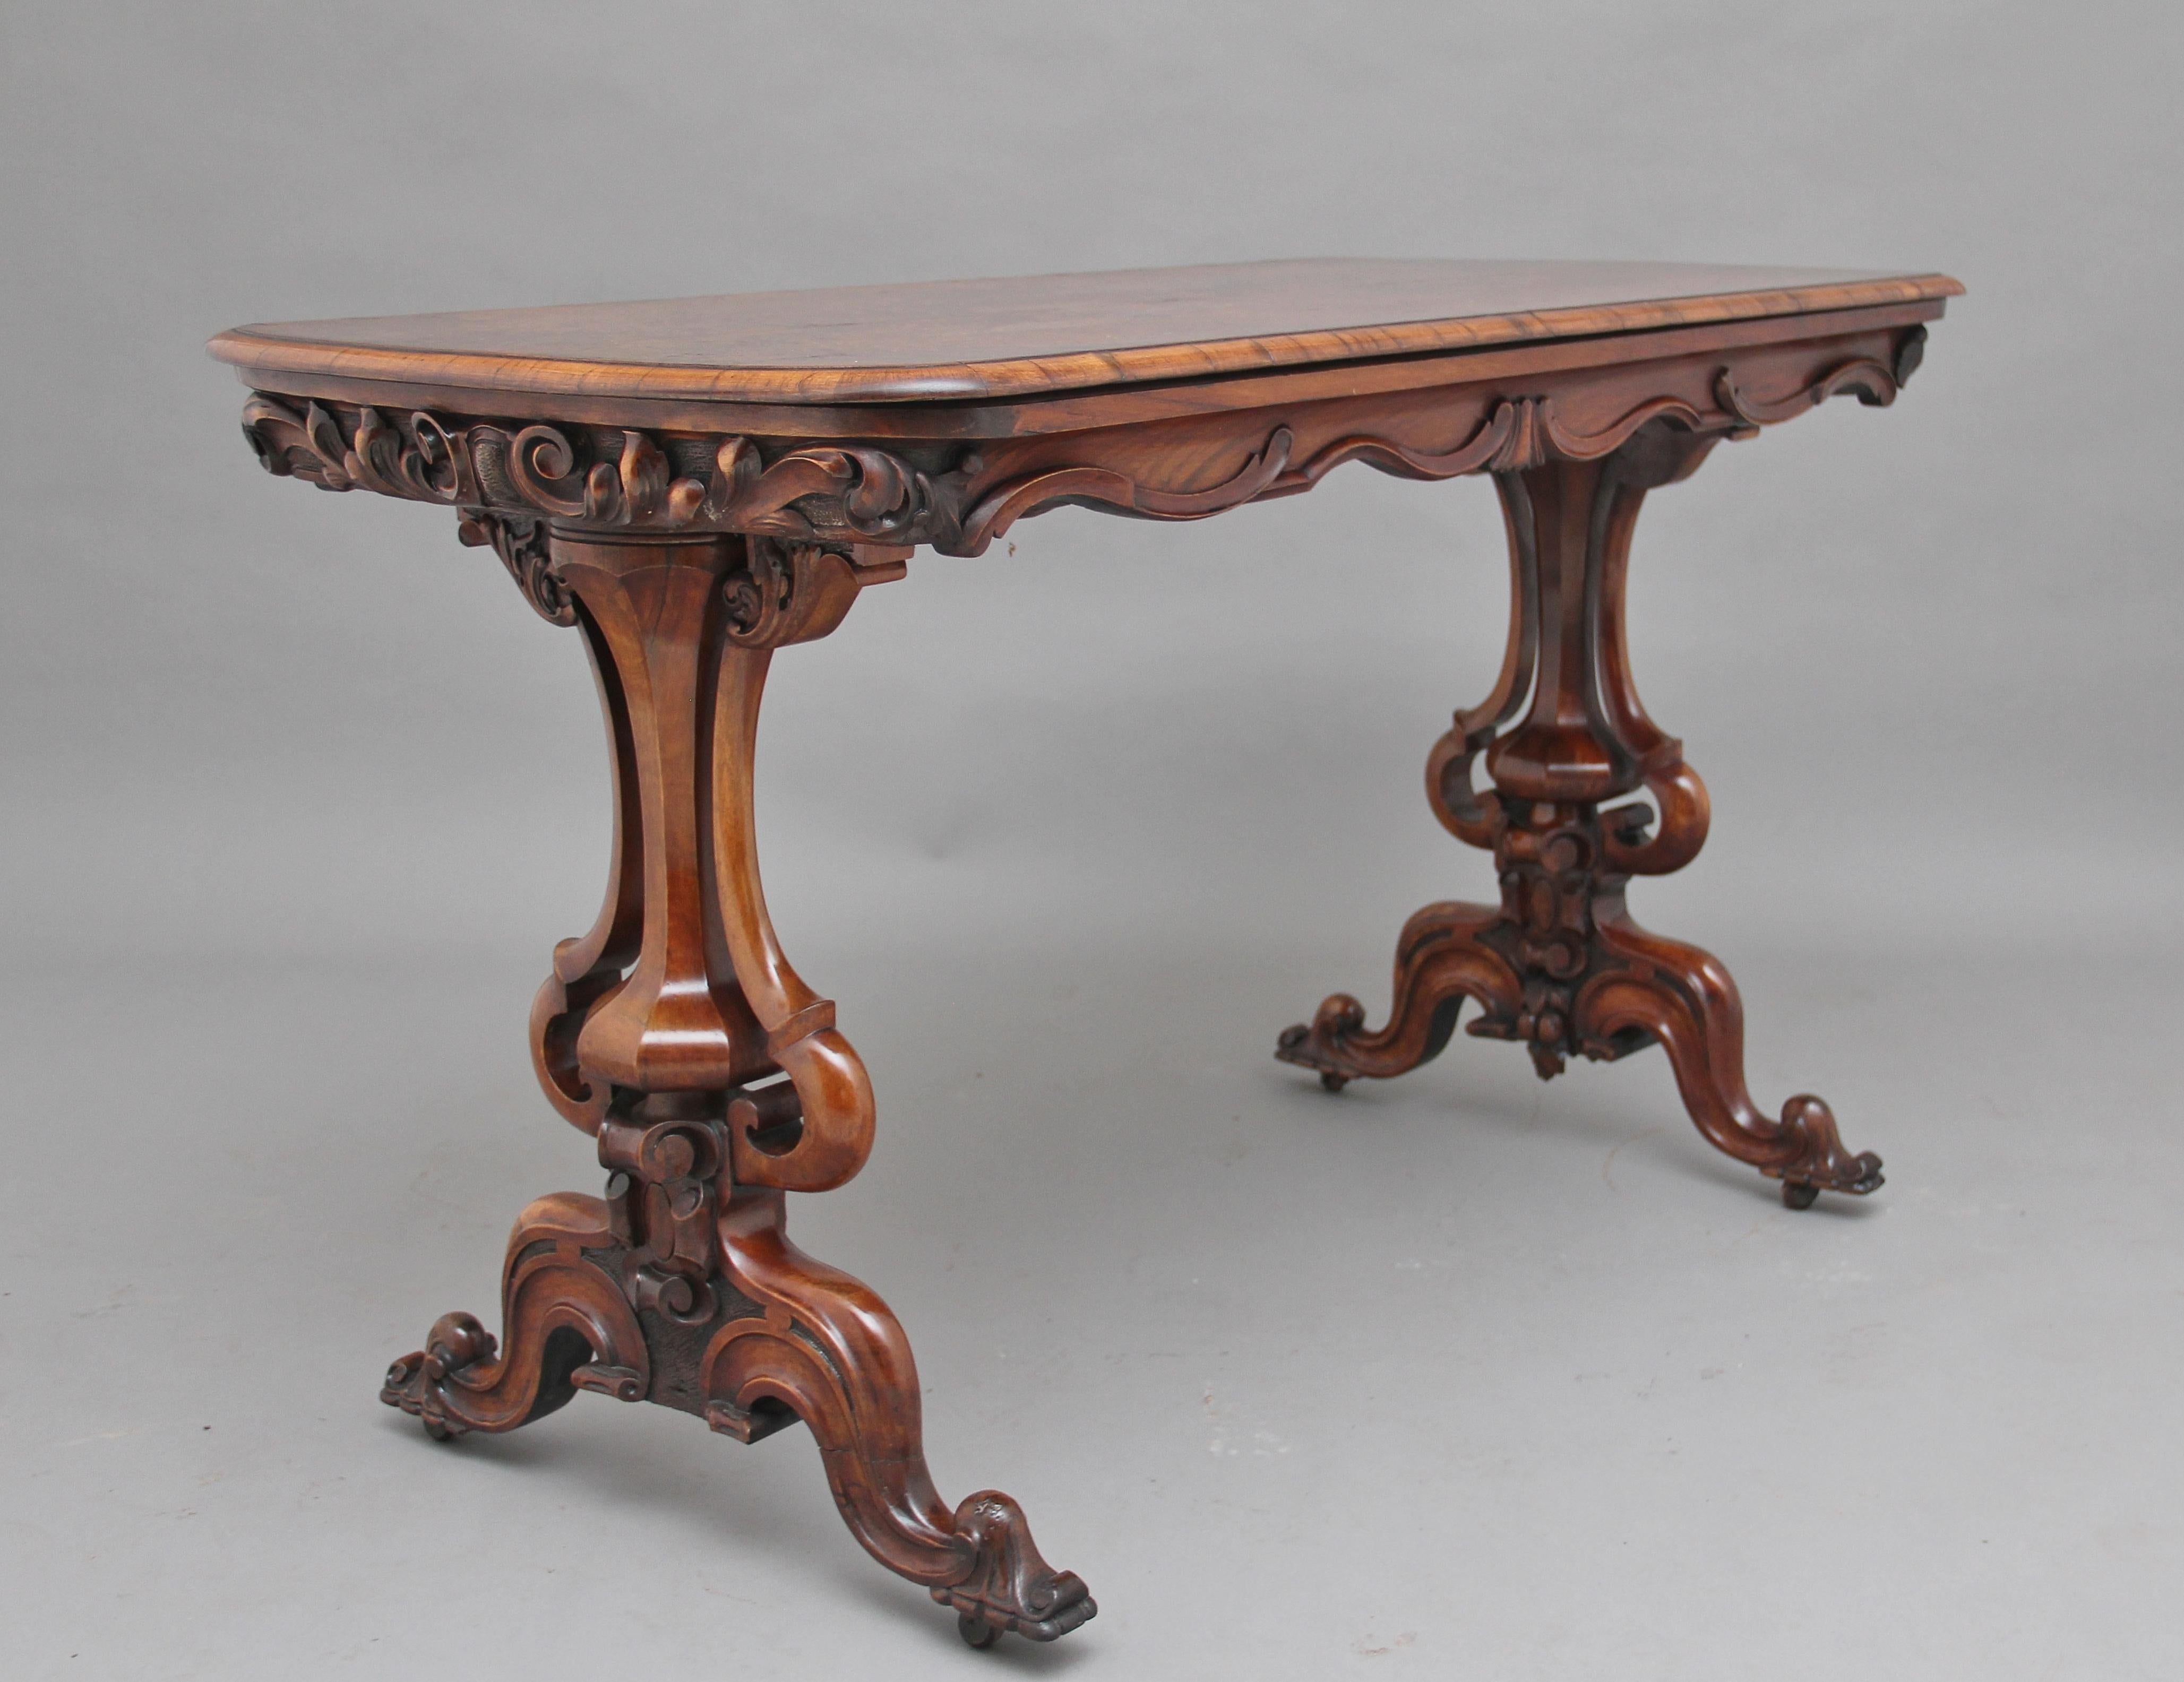 19th century burr walnut centre / stretcher table, having a quarter veneered top with a moulded edge, the shaped and carved frieze below with the sides having lovely carved floral decoration, supported on wonderfully carved and shaped end supports